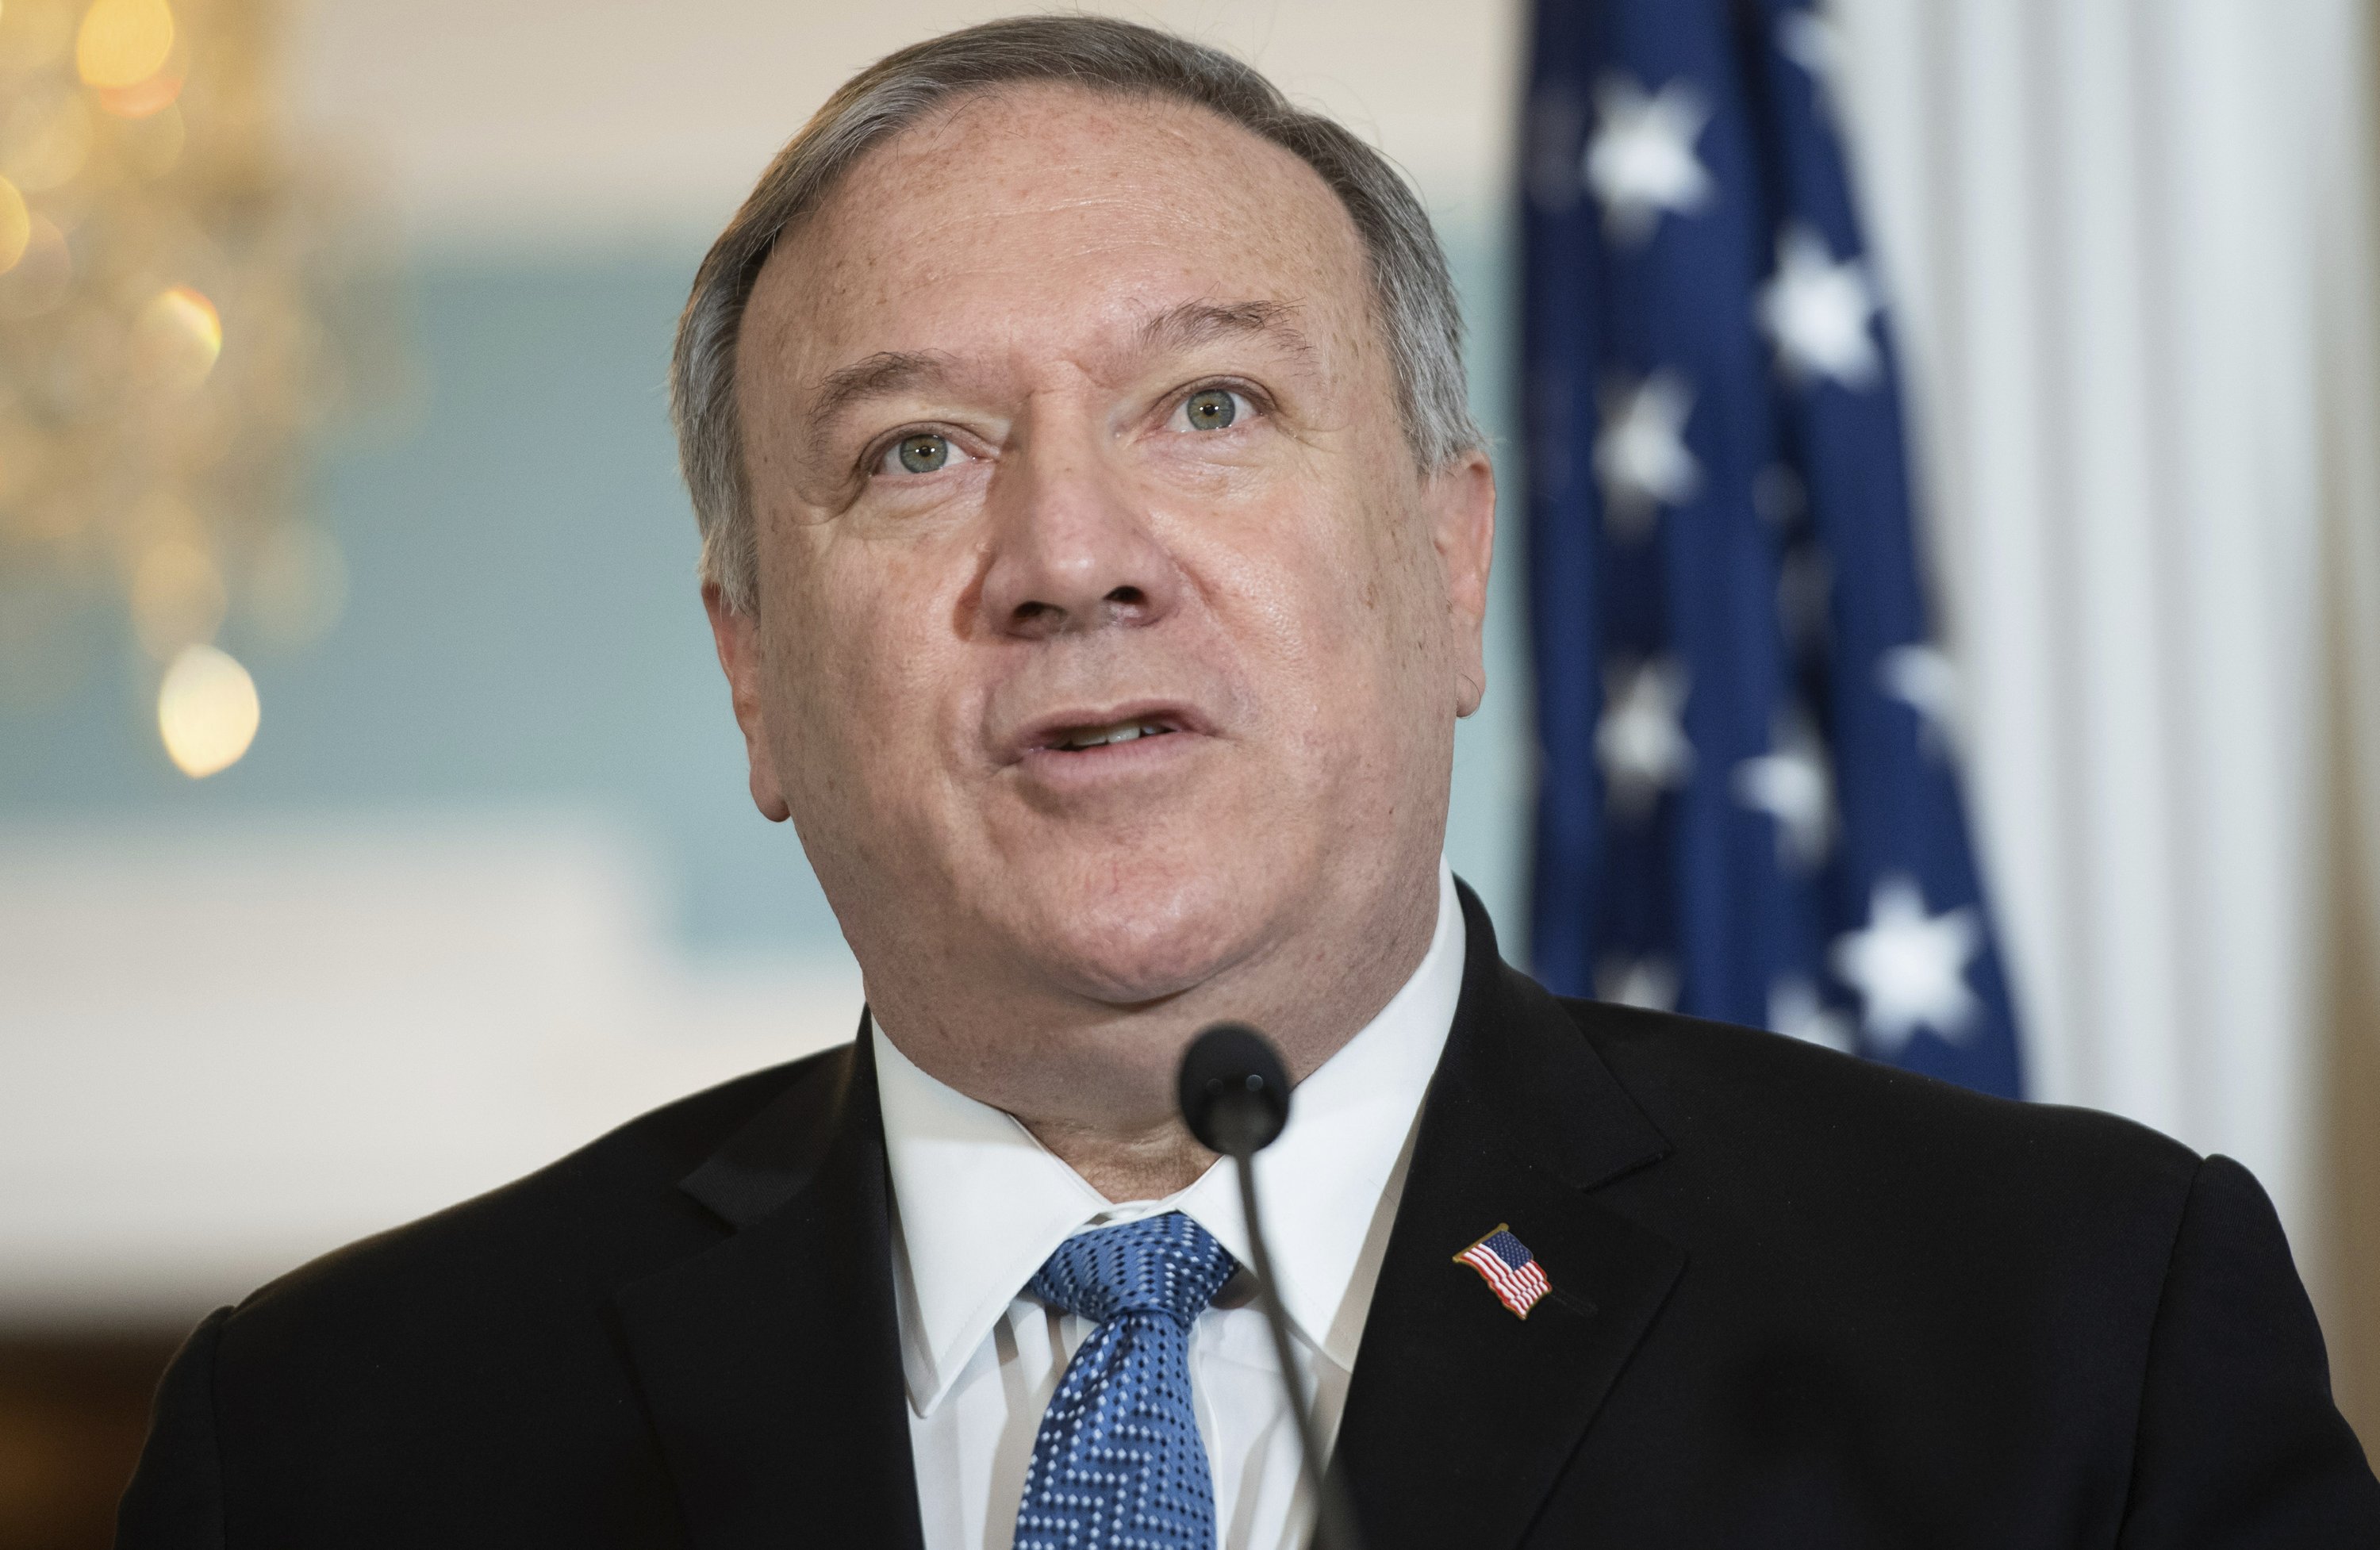 Pompeo invalidates restrictions on diplomatic contacts with Taiwan